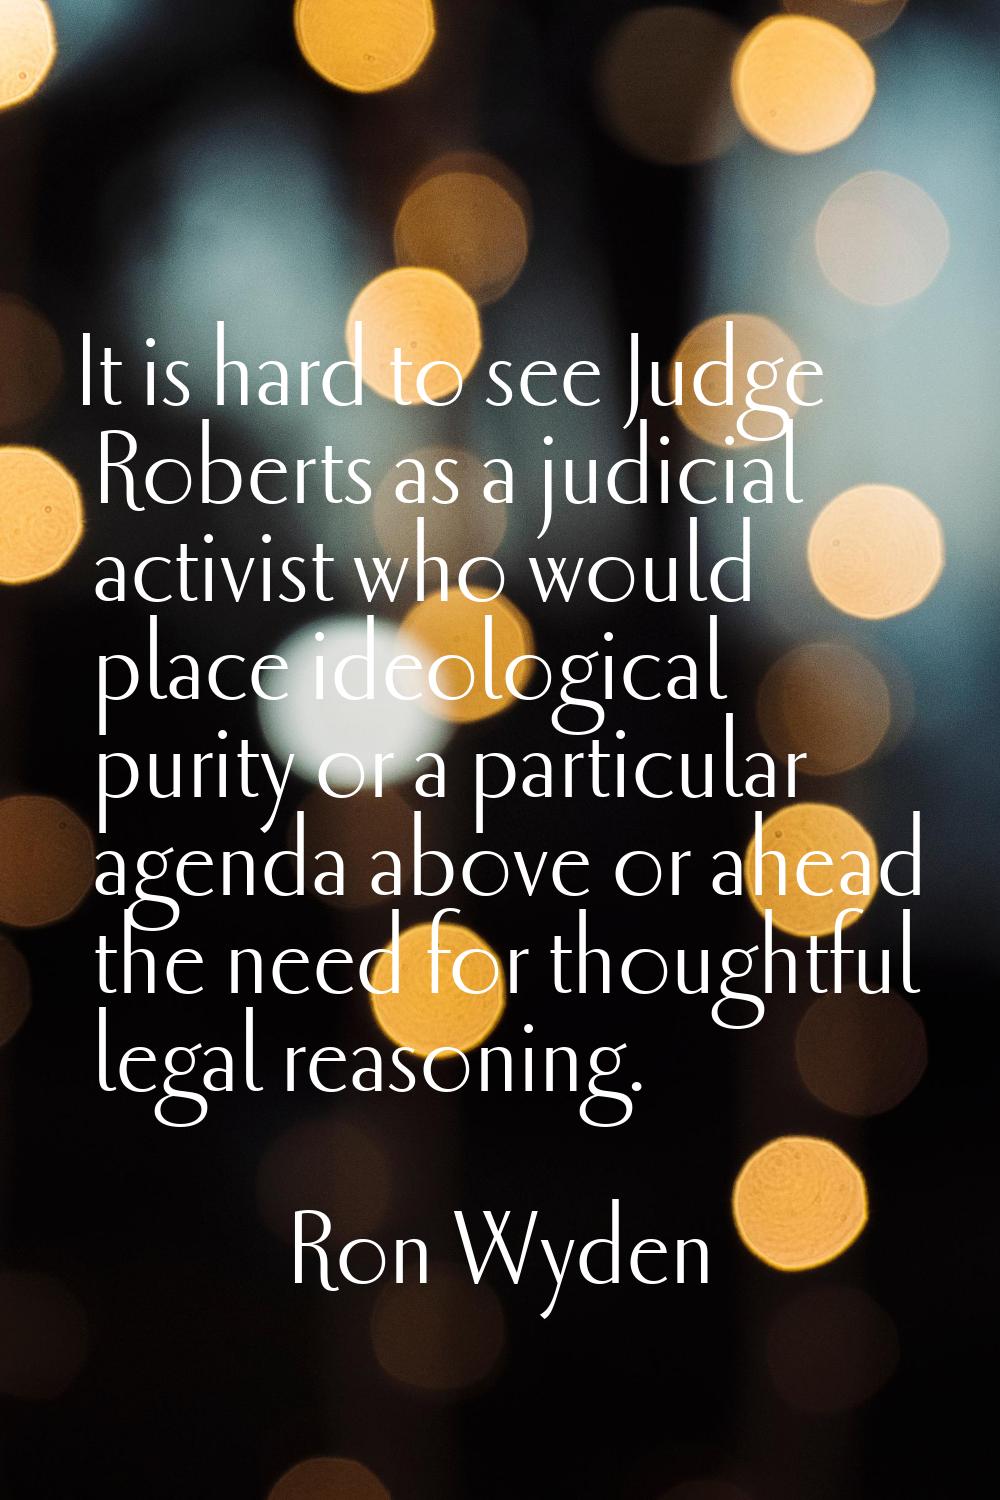 It is hard to see Judge Roberts as a judicial activist who would place ideological purity or a part